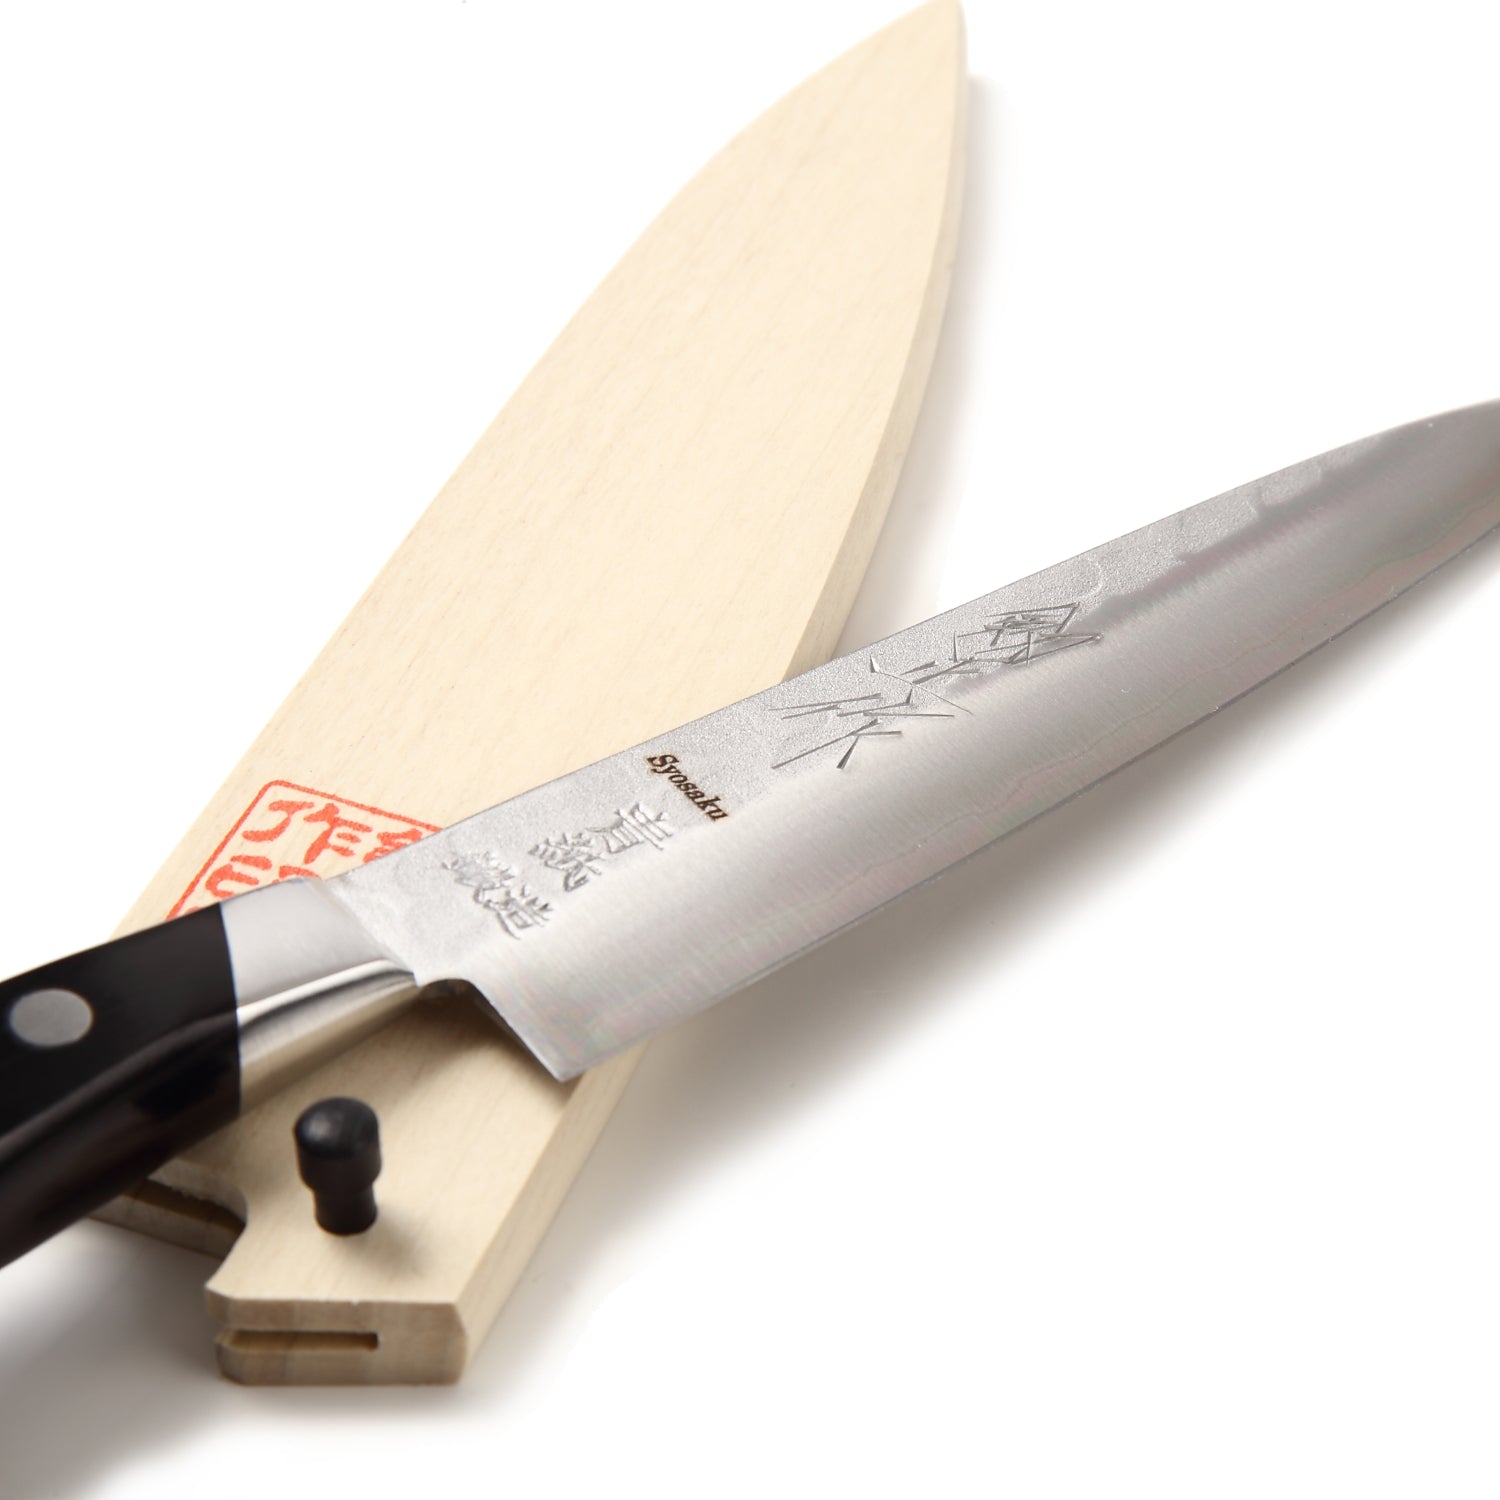 Syosaku Japanese Petty Knife INOX AUS-8A Stainless Steel Integrated Handle, 6-Inch (150mm)